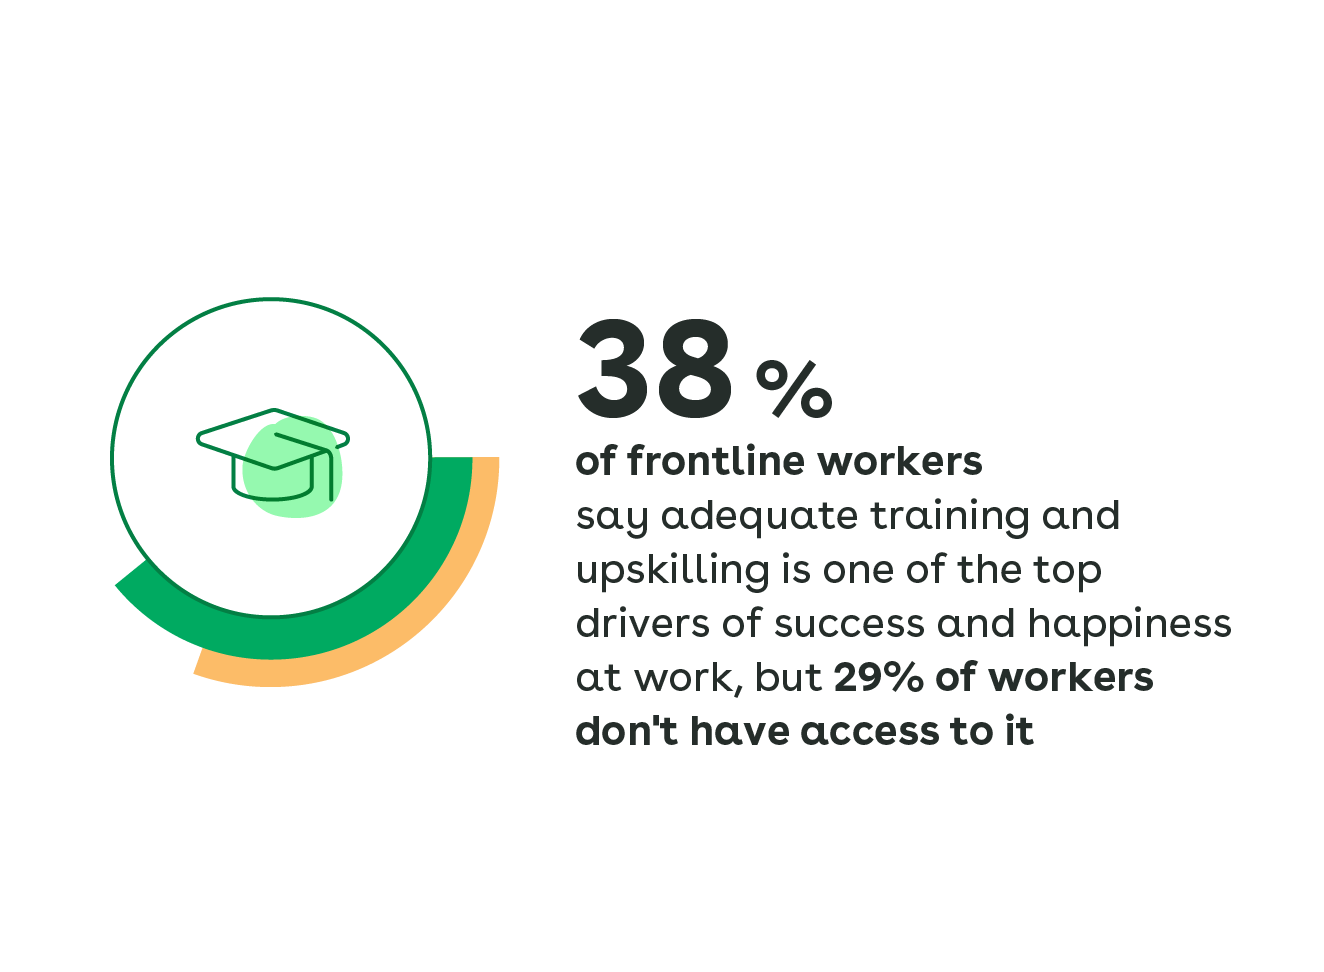 38% of frontline workers say adequate training and upskilling is one of the top drivers of success and happiness at work, but 29% of workers don't have access to it